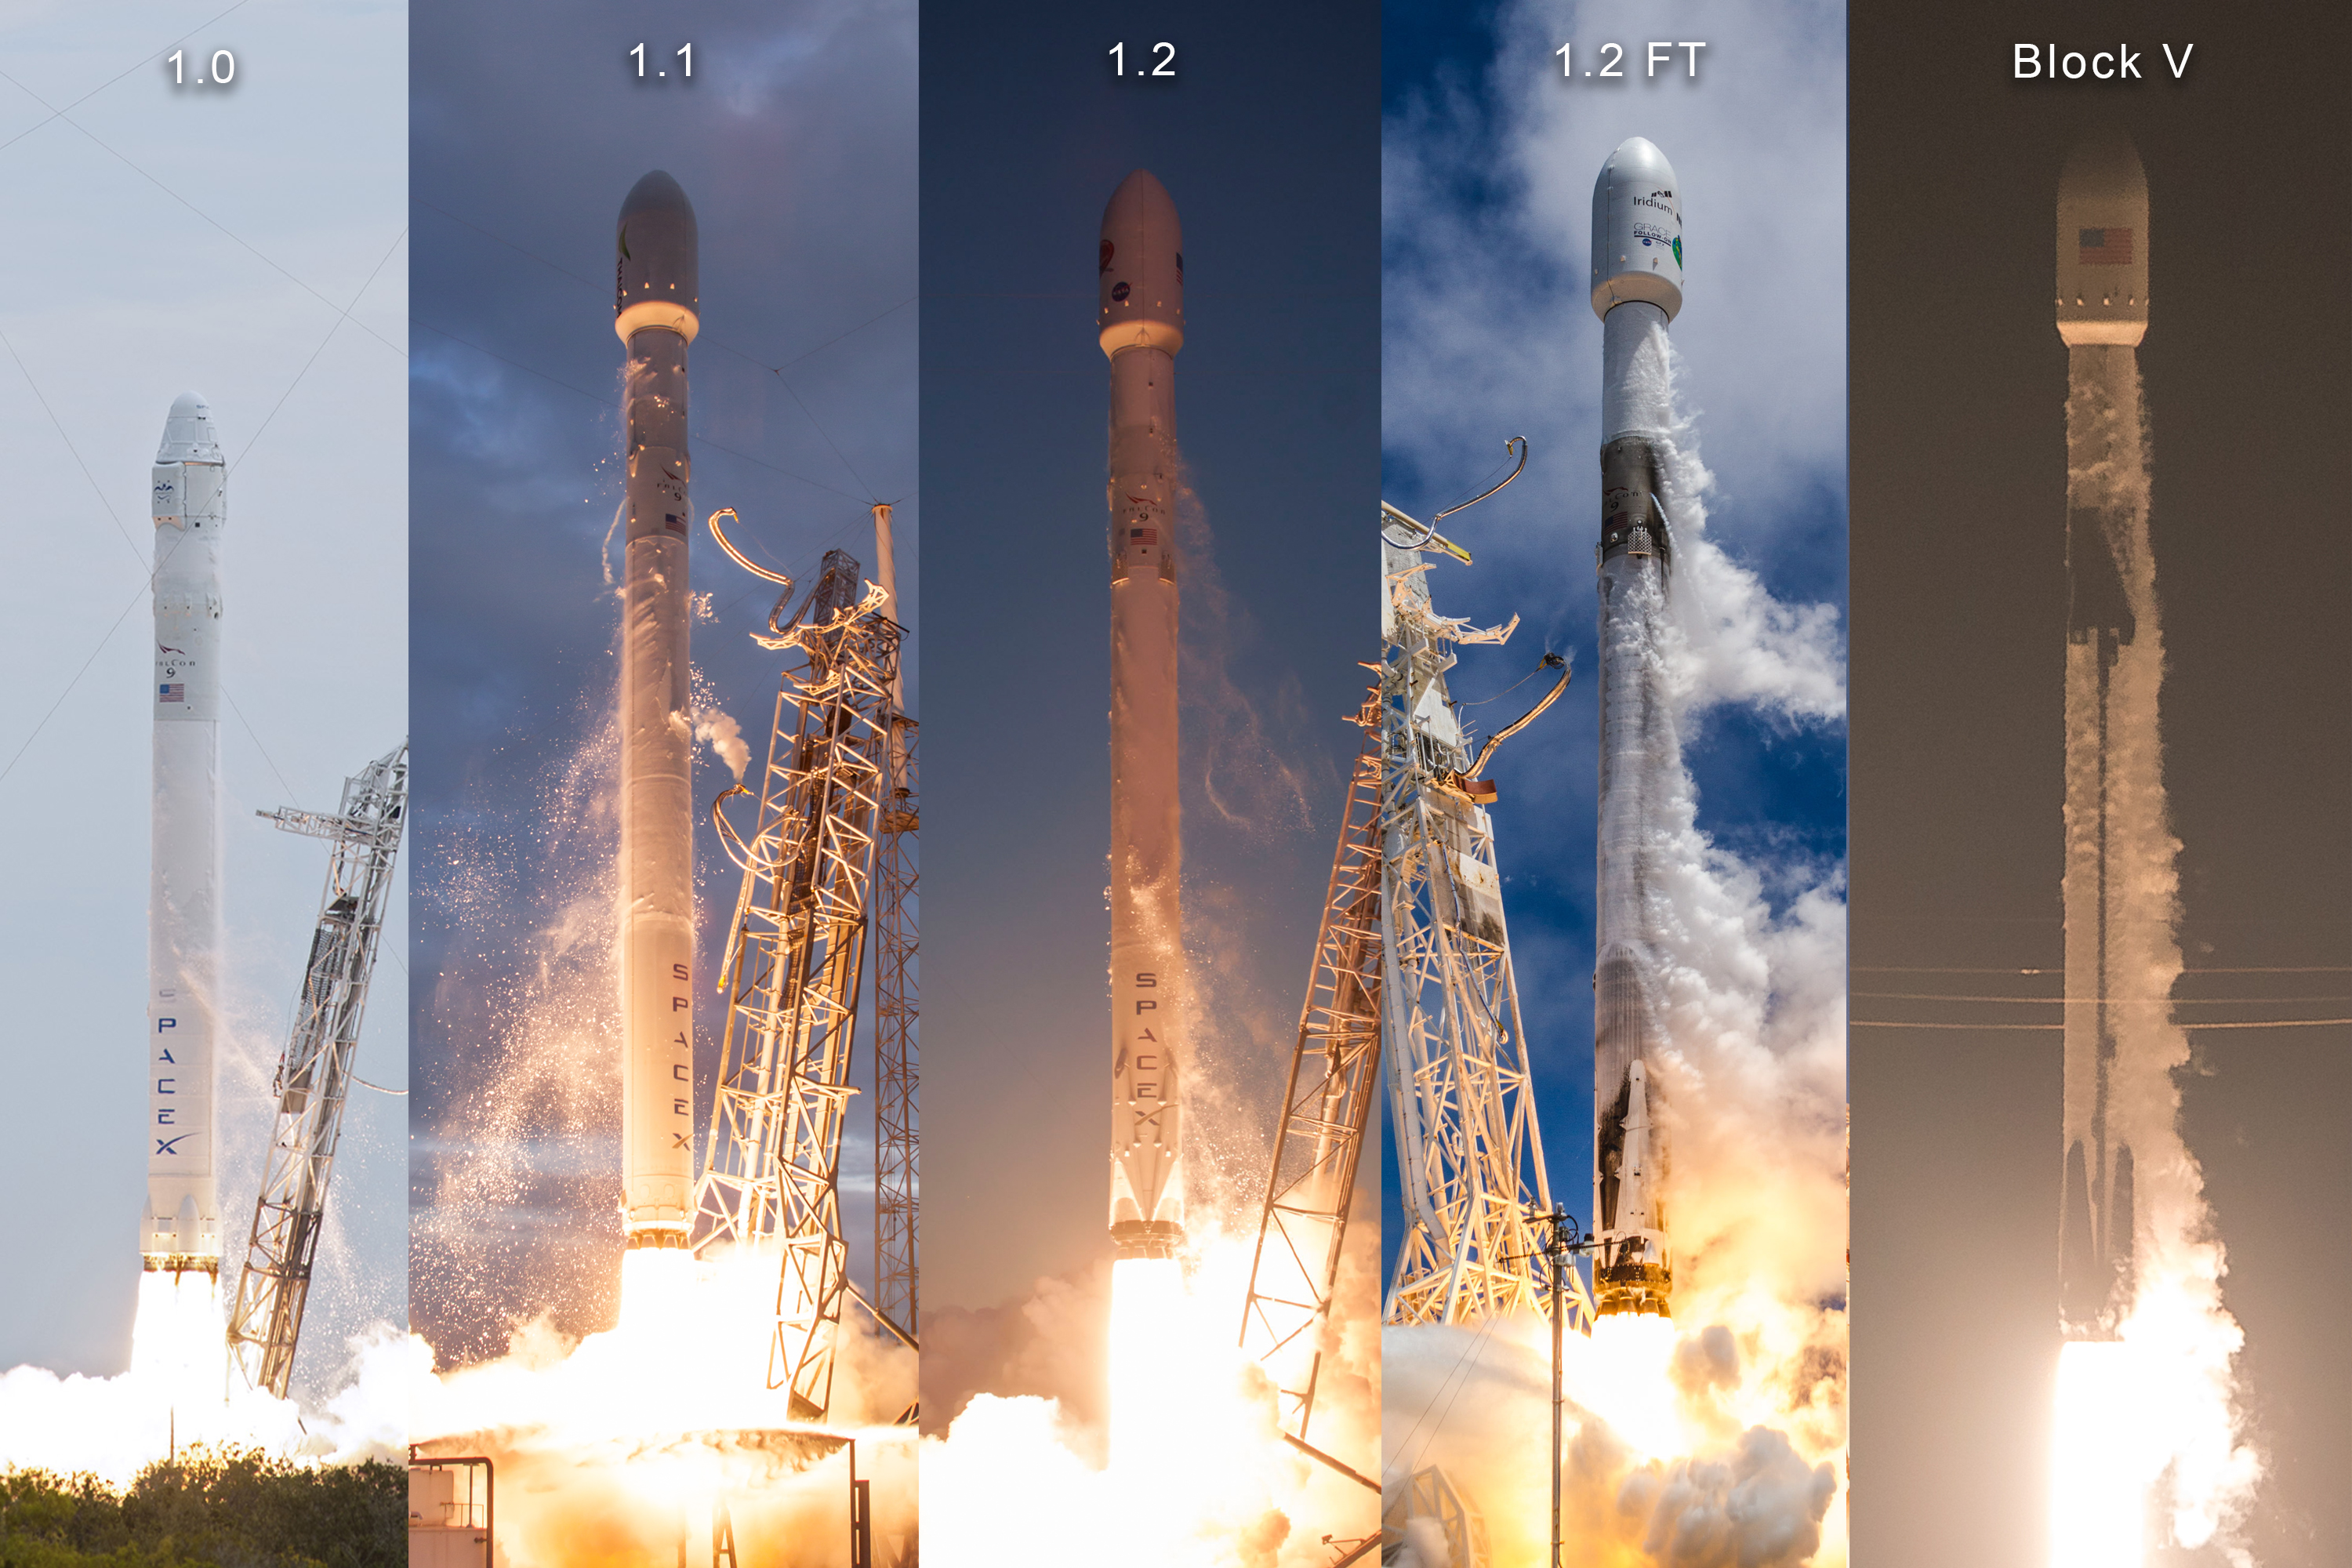 Now witness the firepower of this fully operational Falcon 9 rocket | Ars Technica